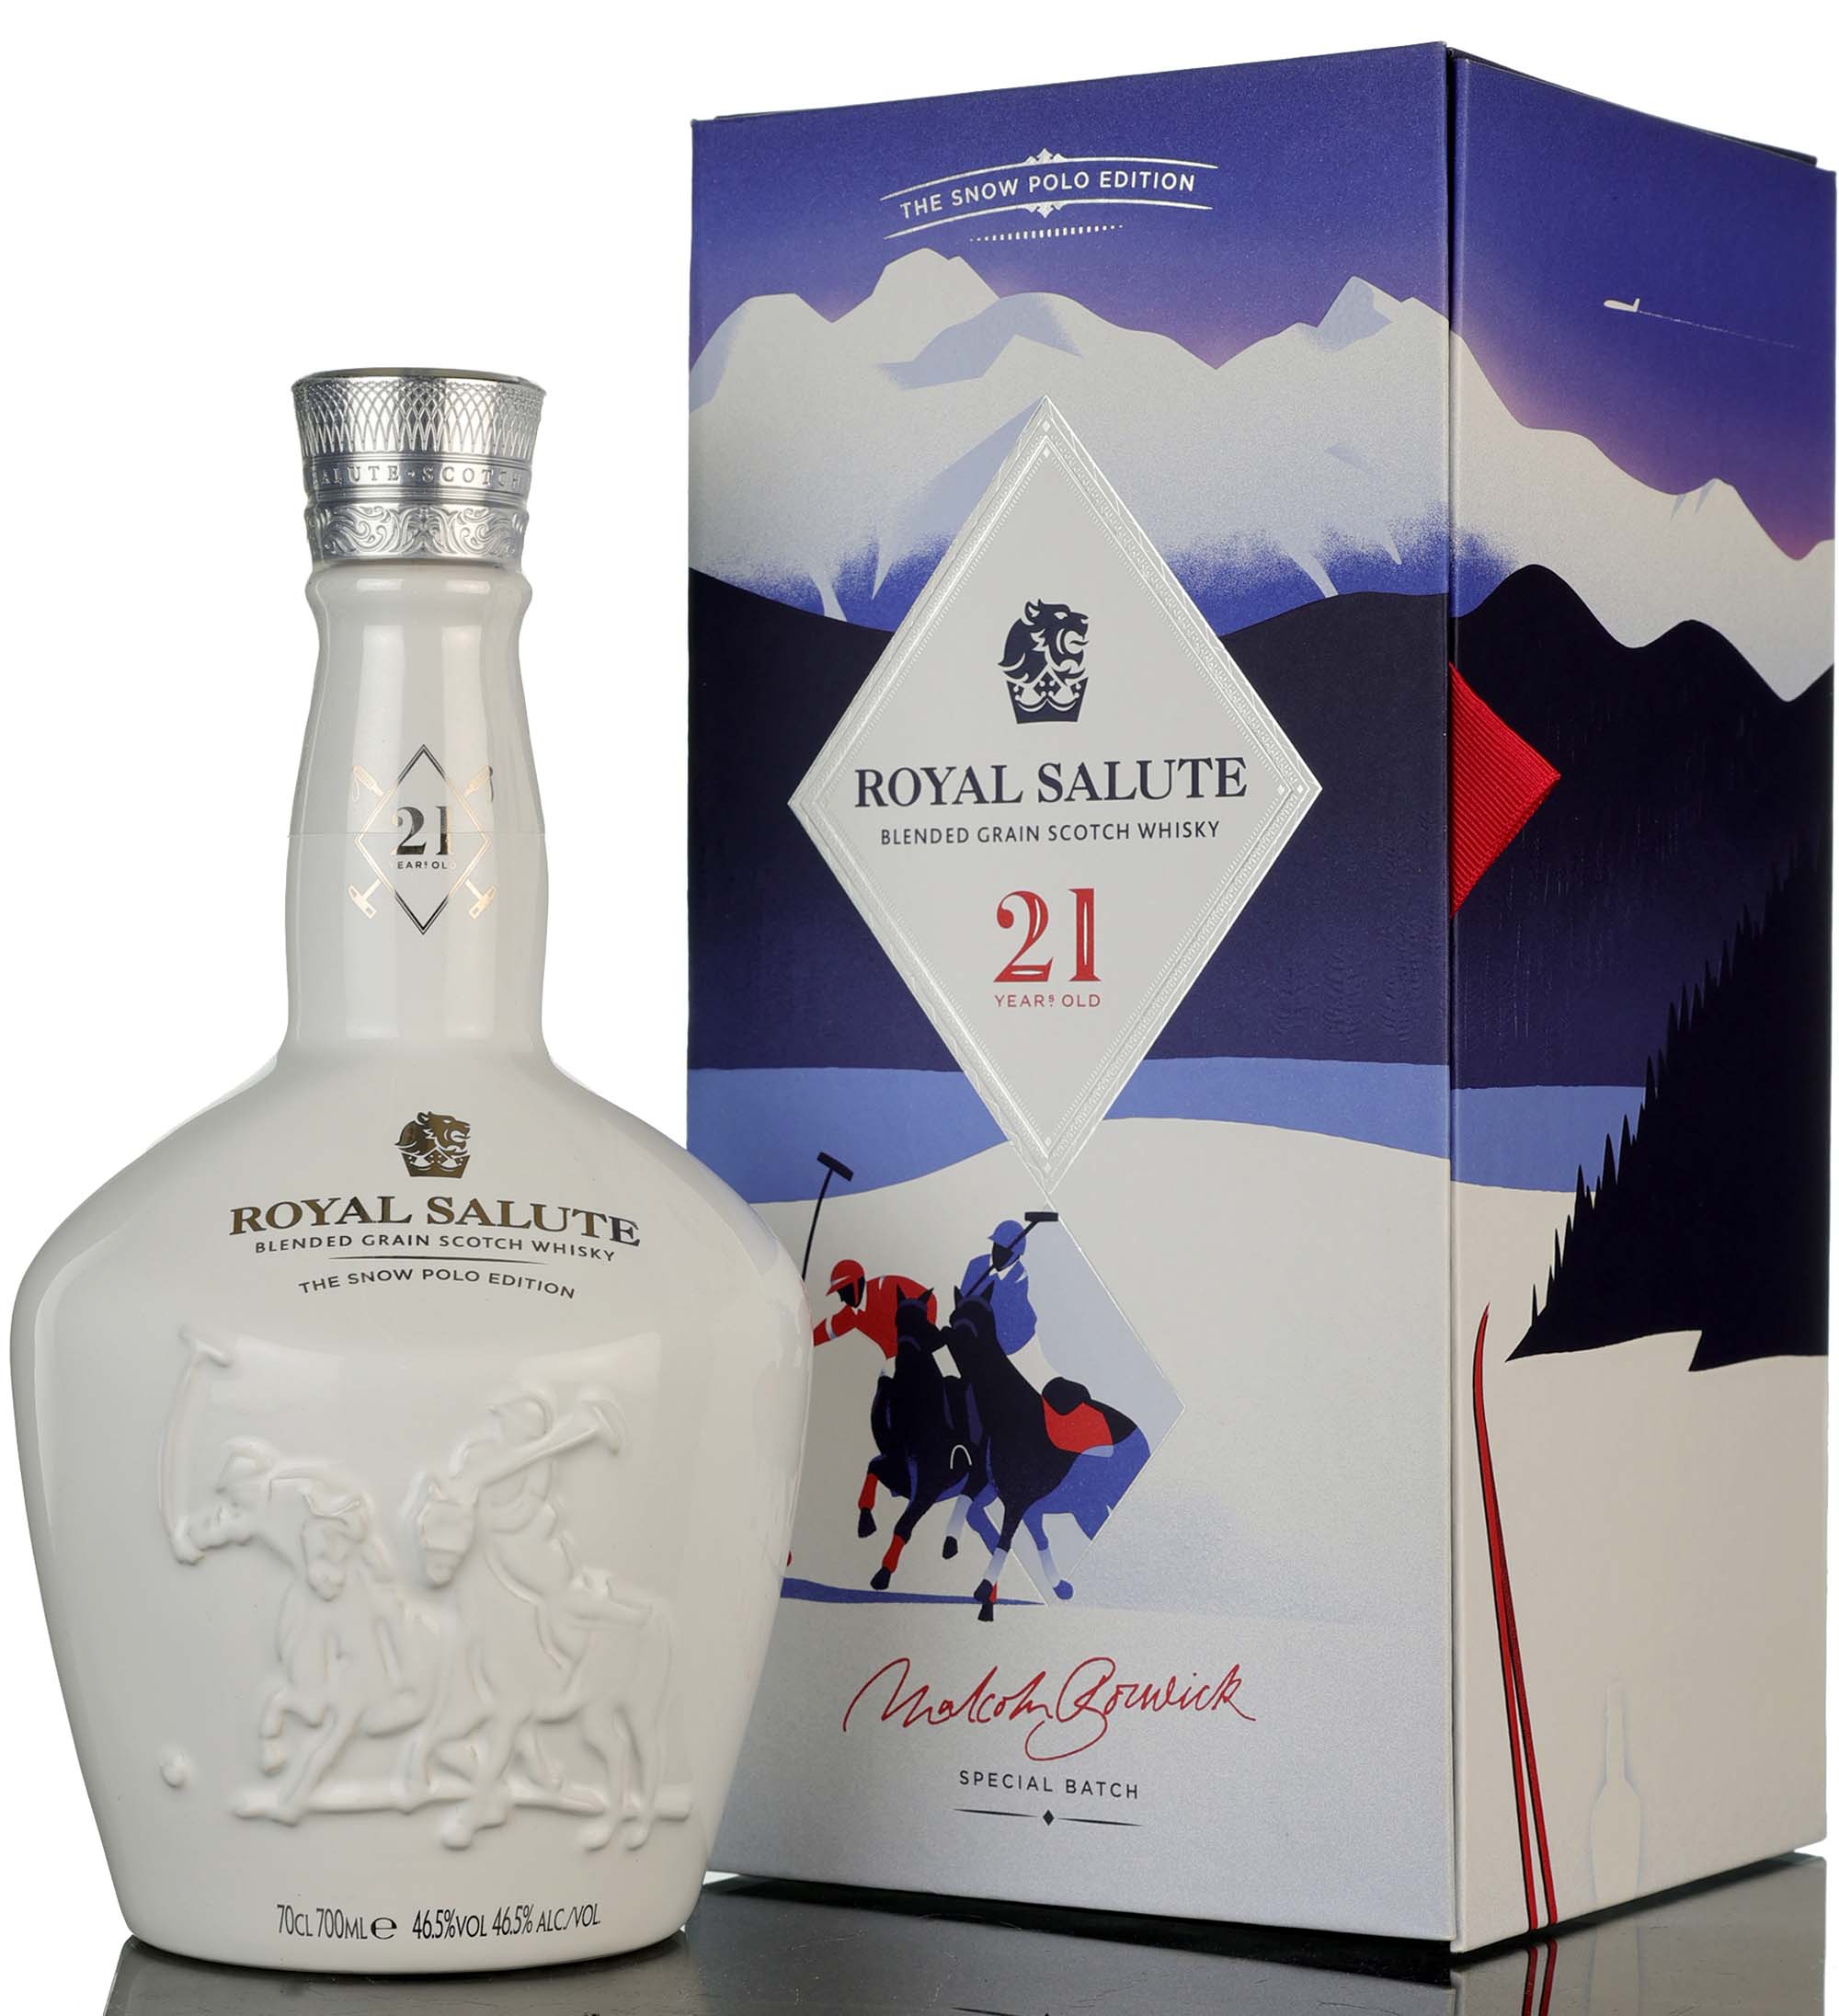 Royal Salute 21 Year Old - The Snow Polo Edition - 2020 Release - Ceramic